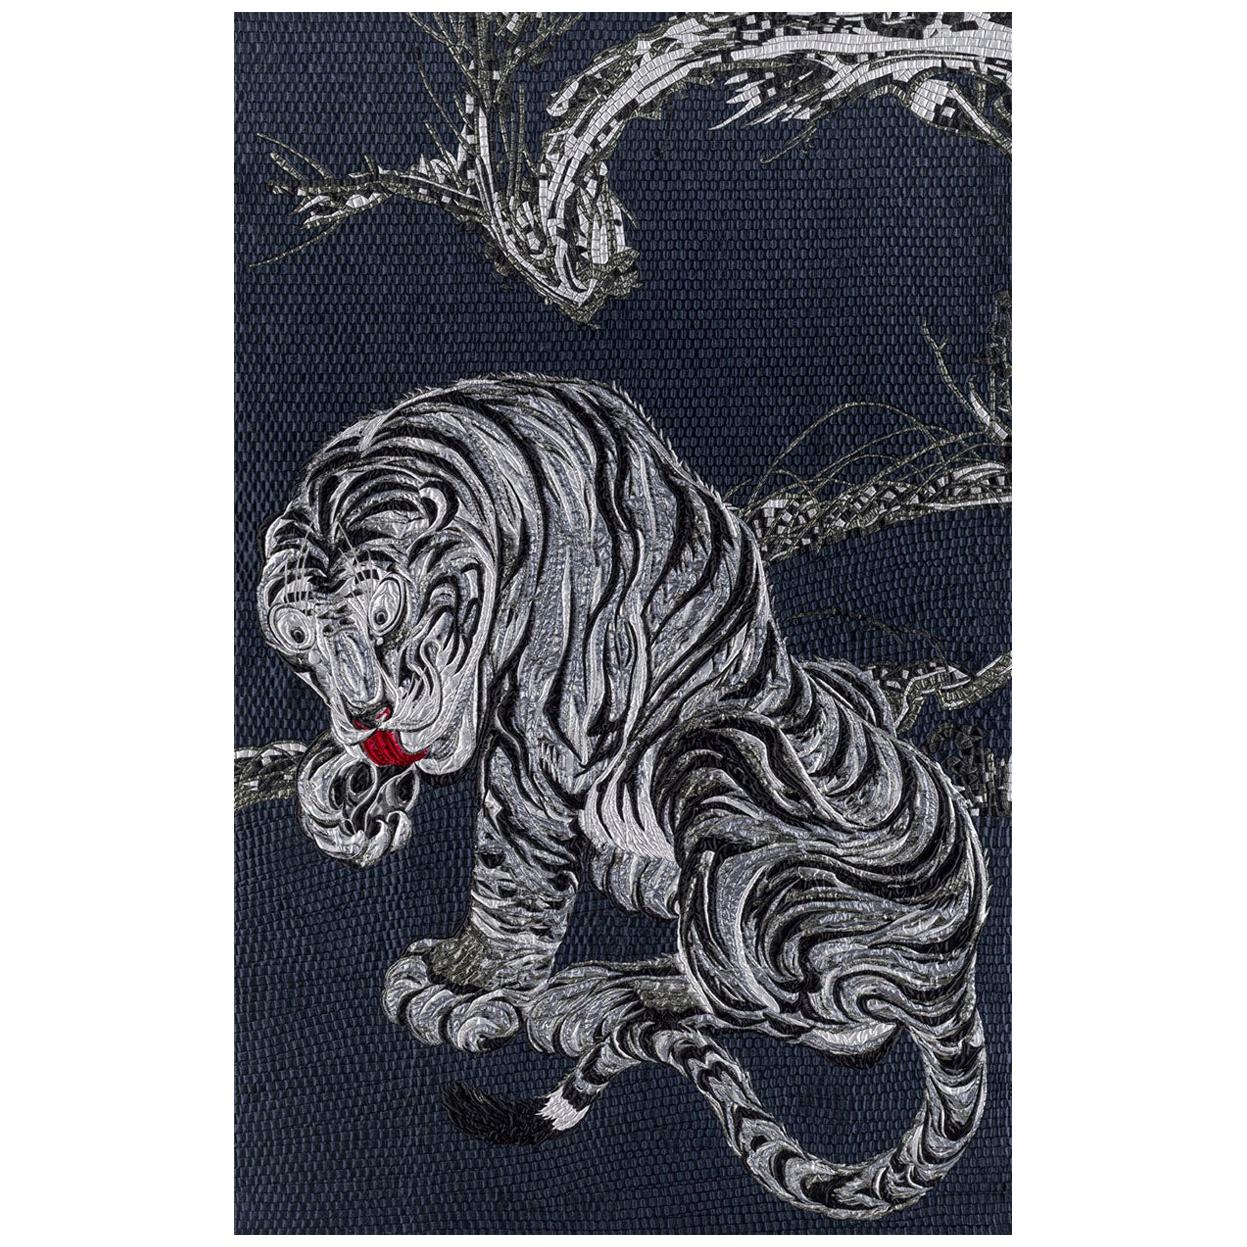  Fabric Tapestry with Tiger Design Upholstered Panel on Demand For Sale